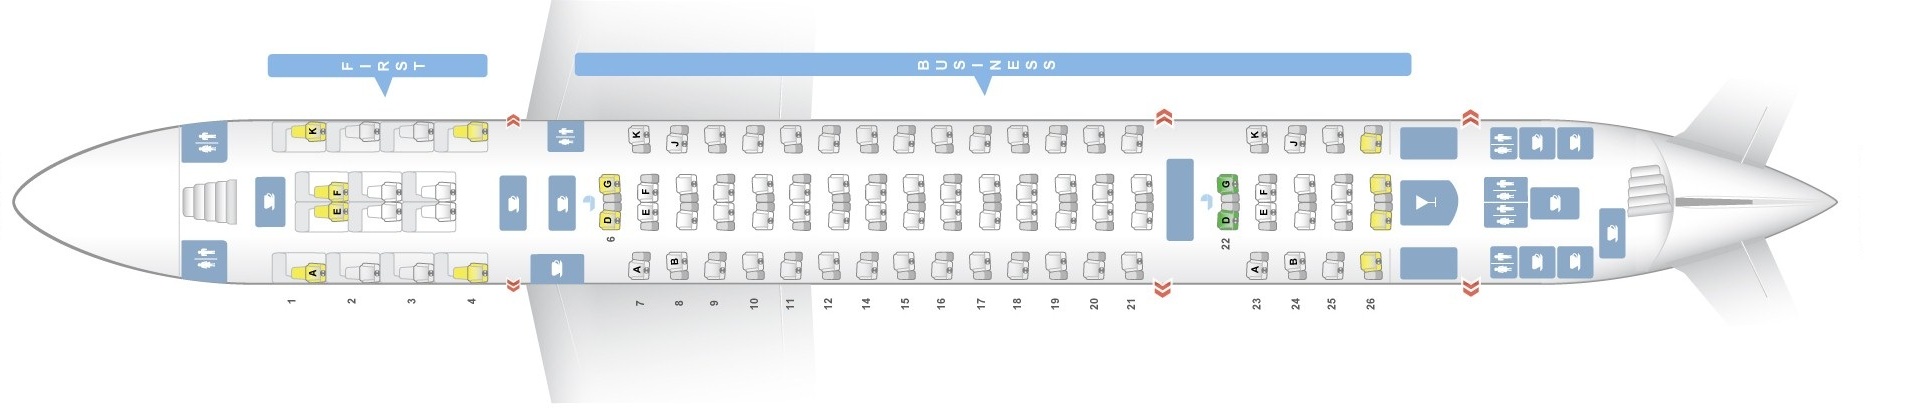 Seat map Airbus A380-800 Emirates. Best seats in the plane